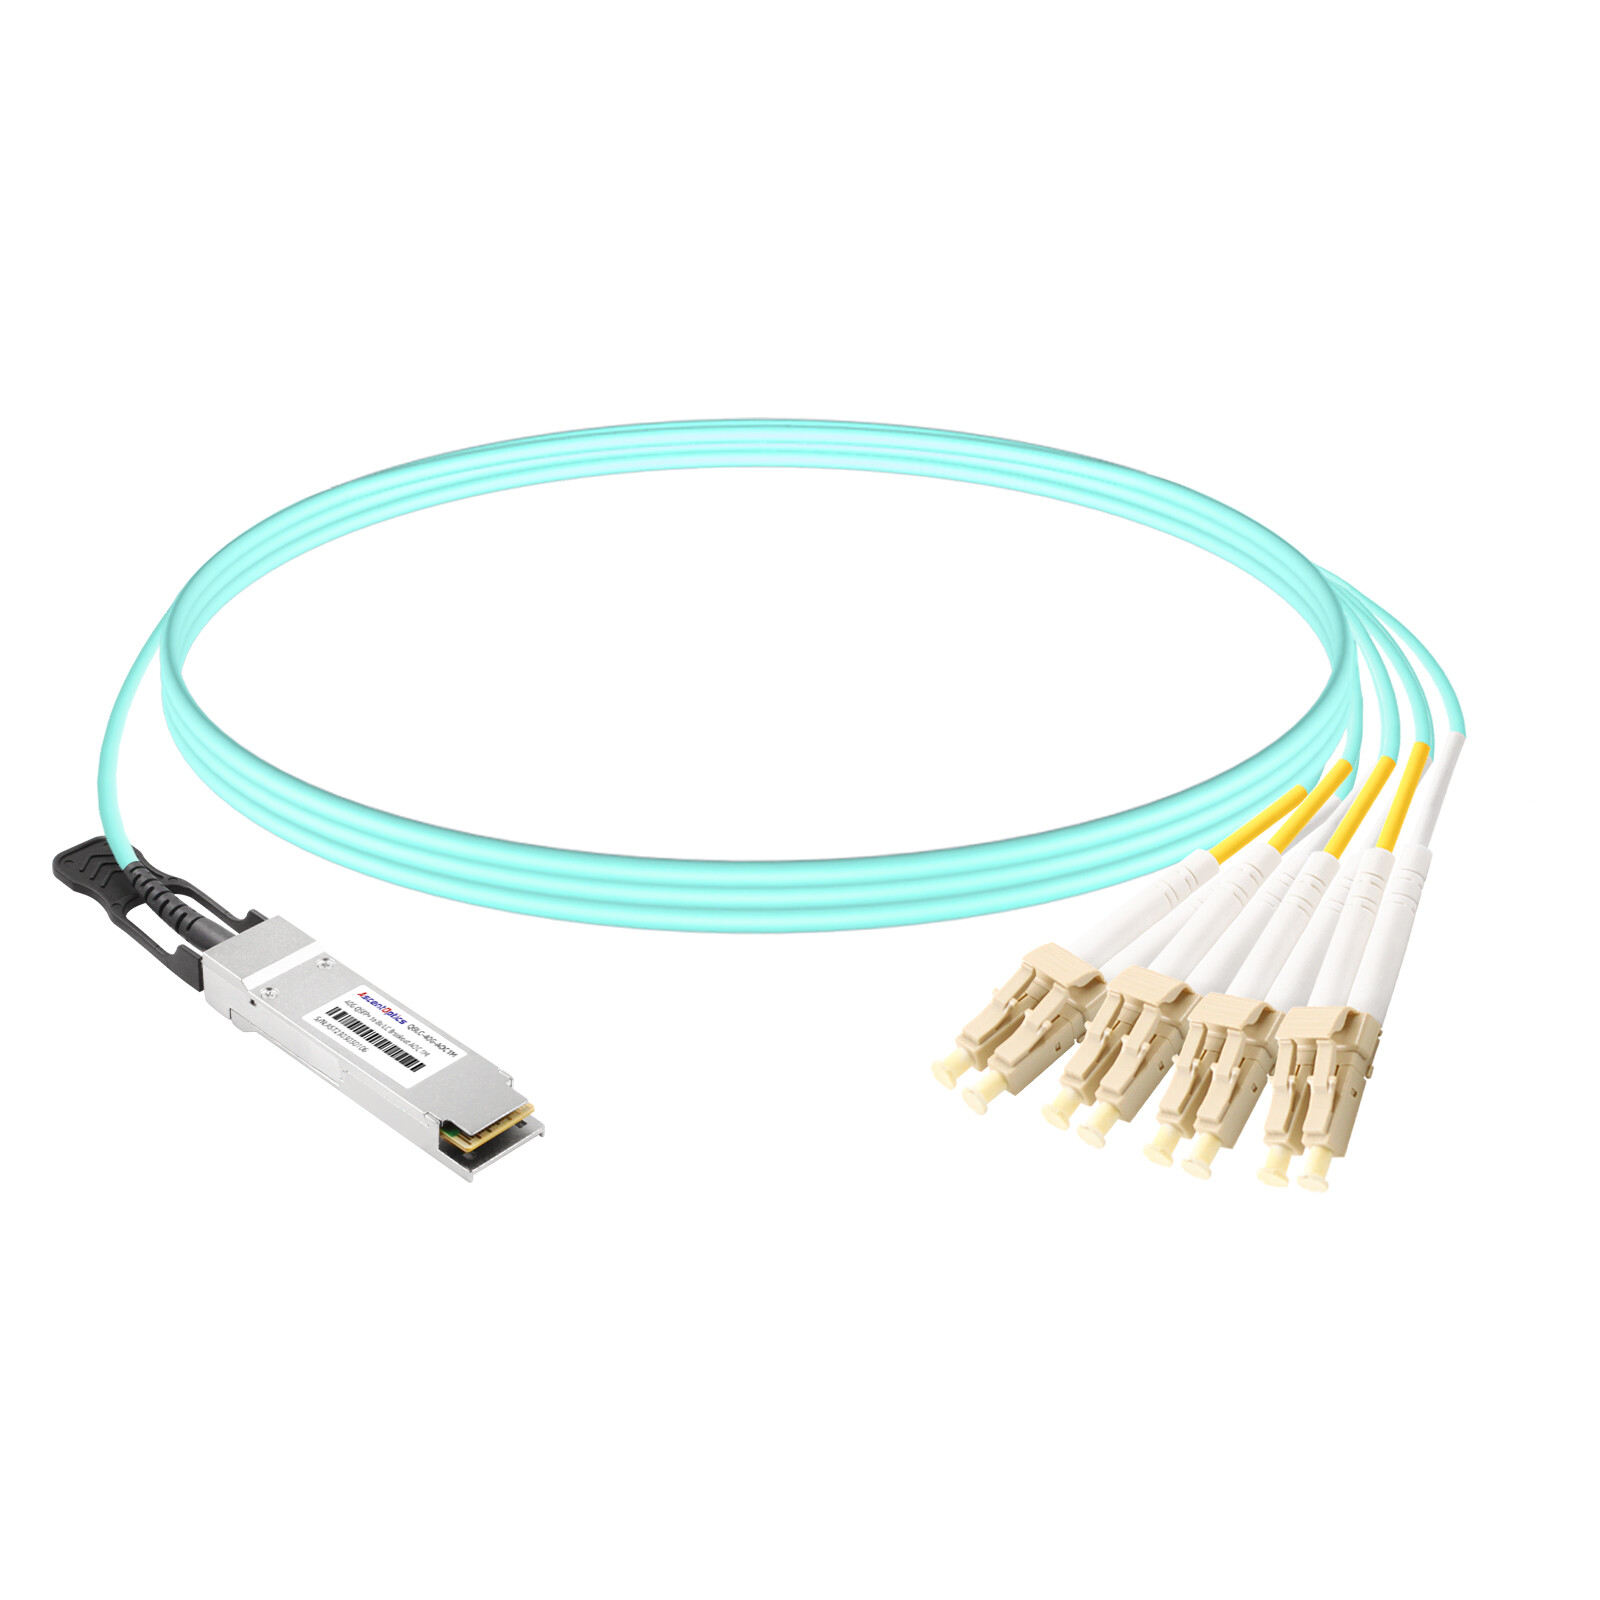 40G QSFP+ to 8x LC Breakout AOC Cable,1 Meter